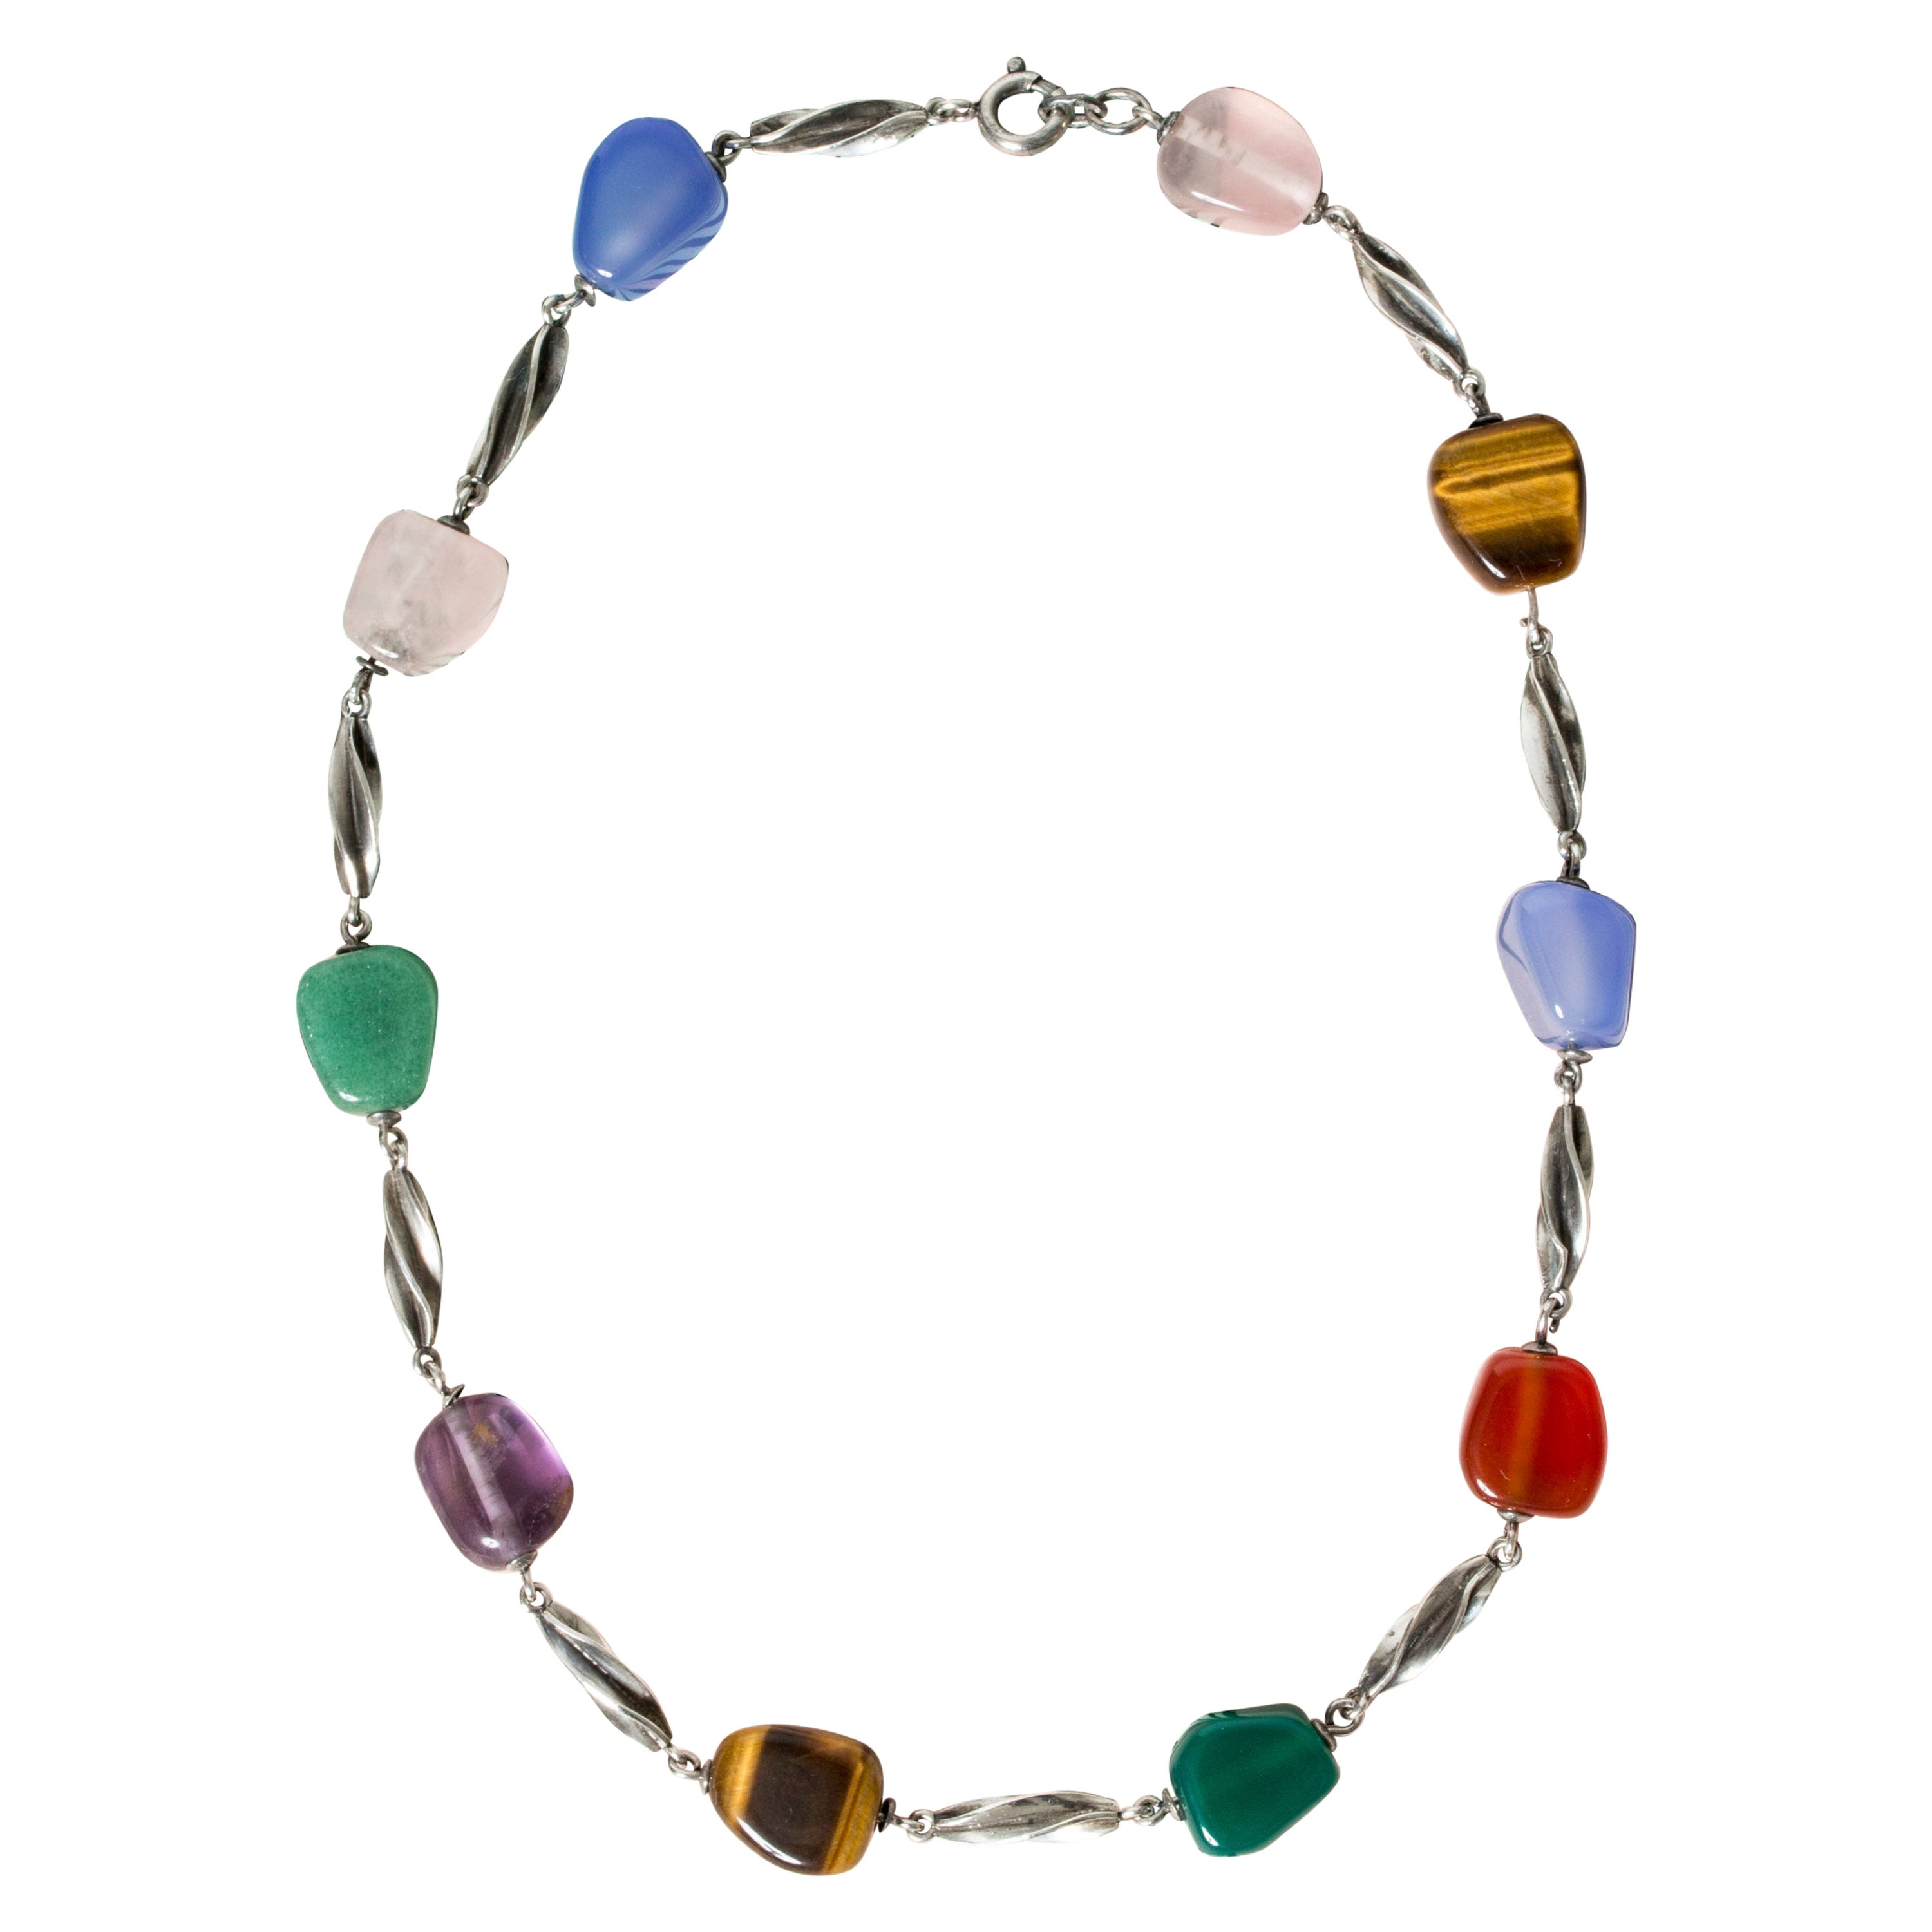 Modernist Silver Collier with Semiprecious Stones, Sweden, 1960s